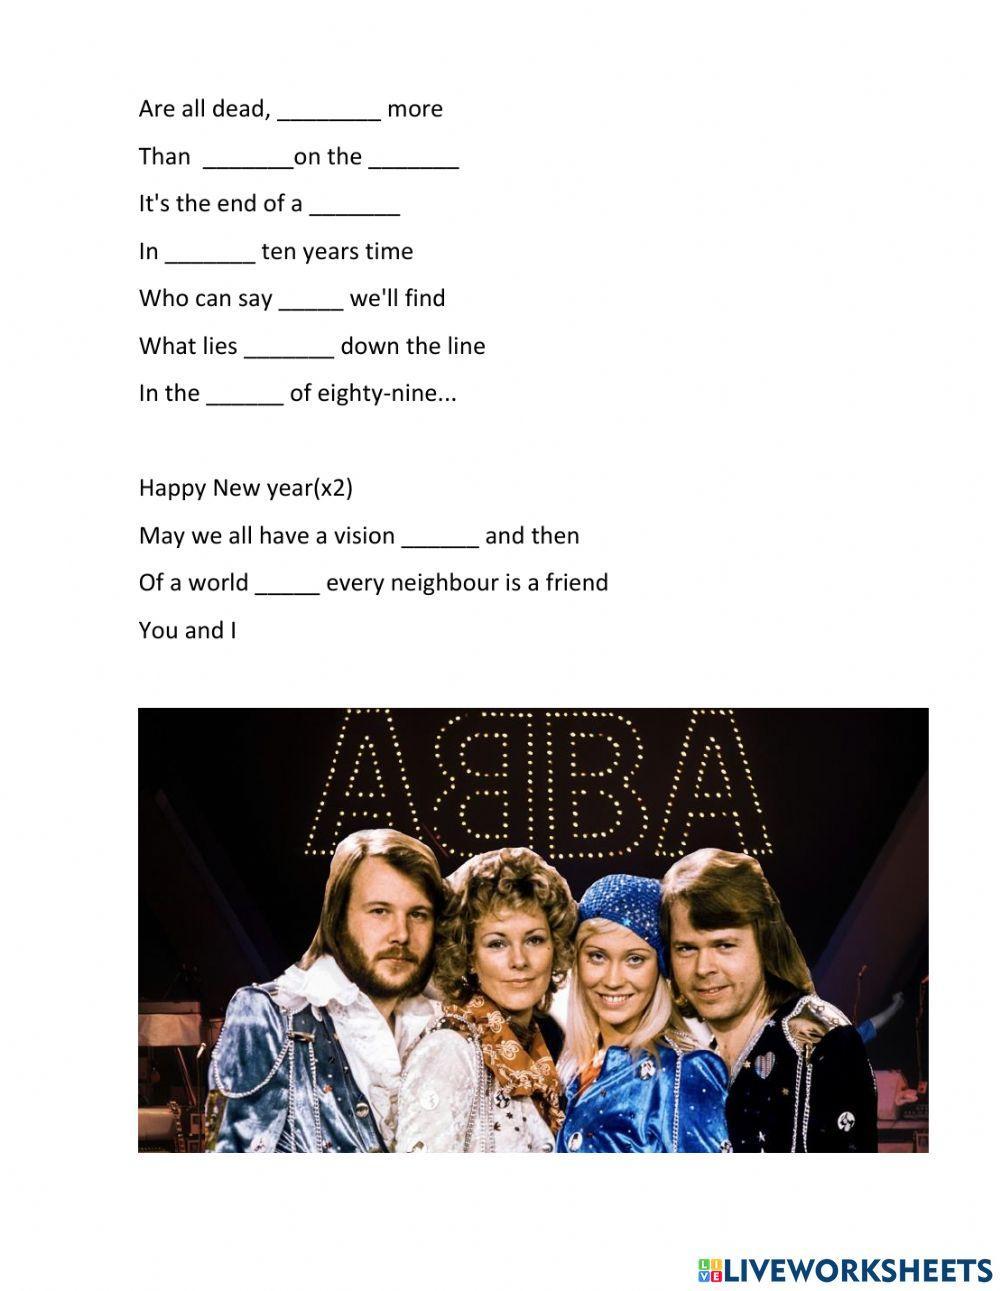 Happy New Year by Abba